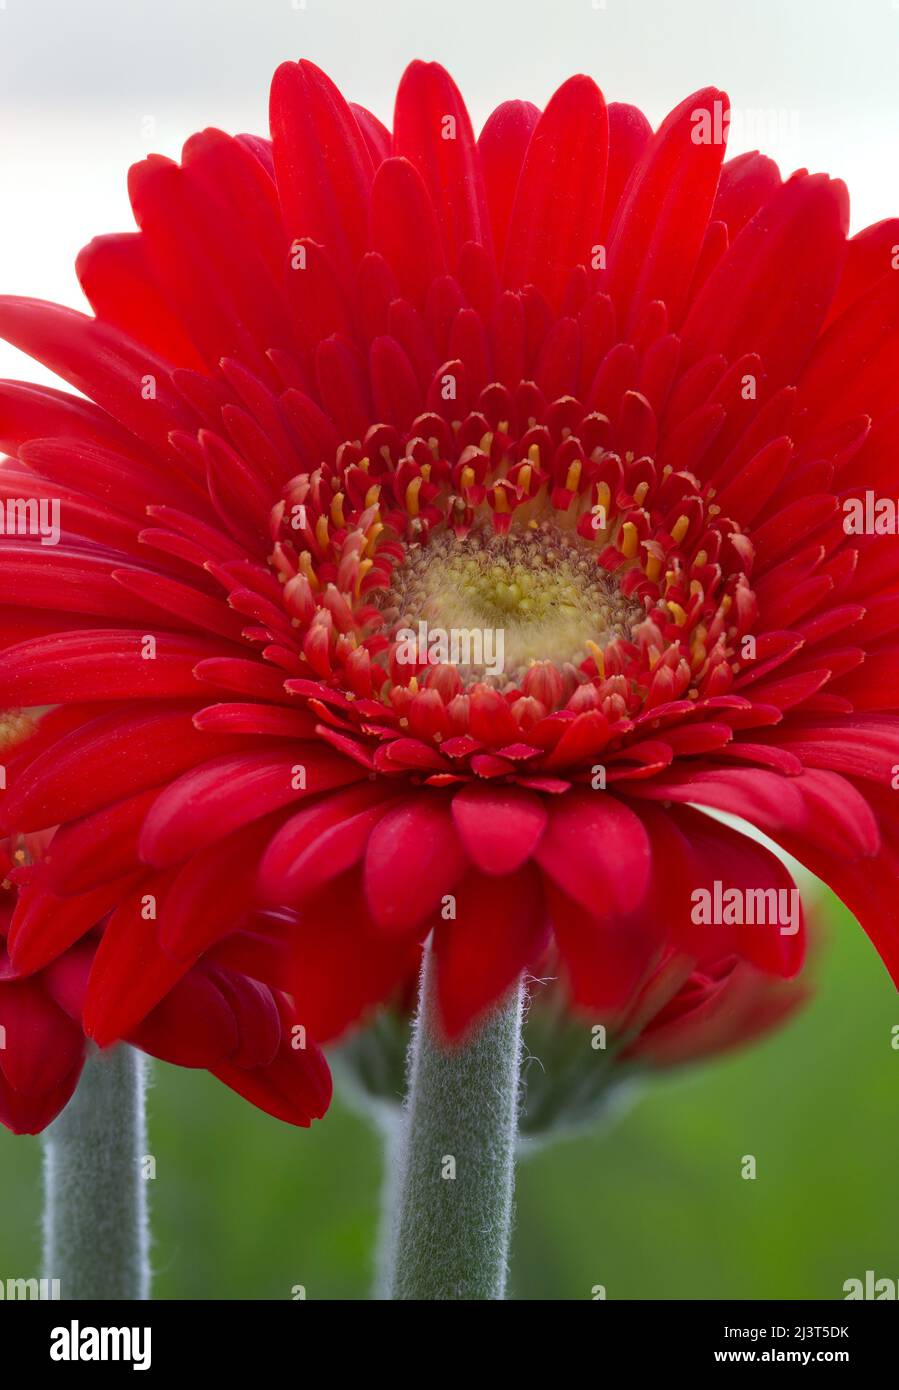 Red Gerbera [ Asteraceae (Compositae) family] flower close up Stock Photo